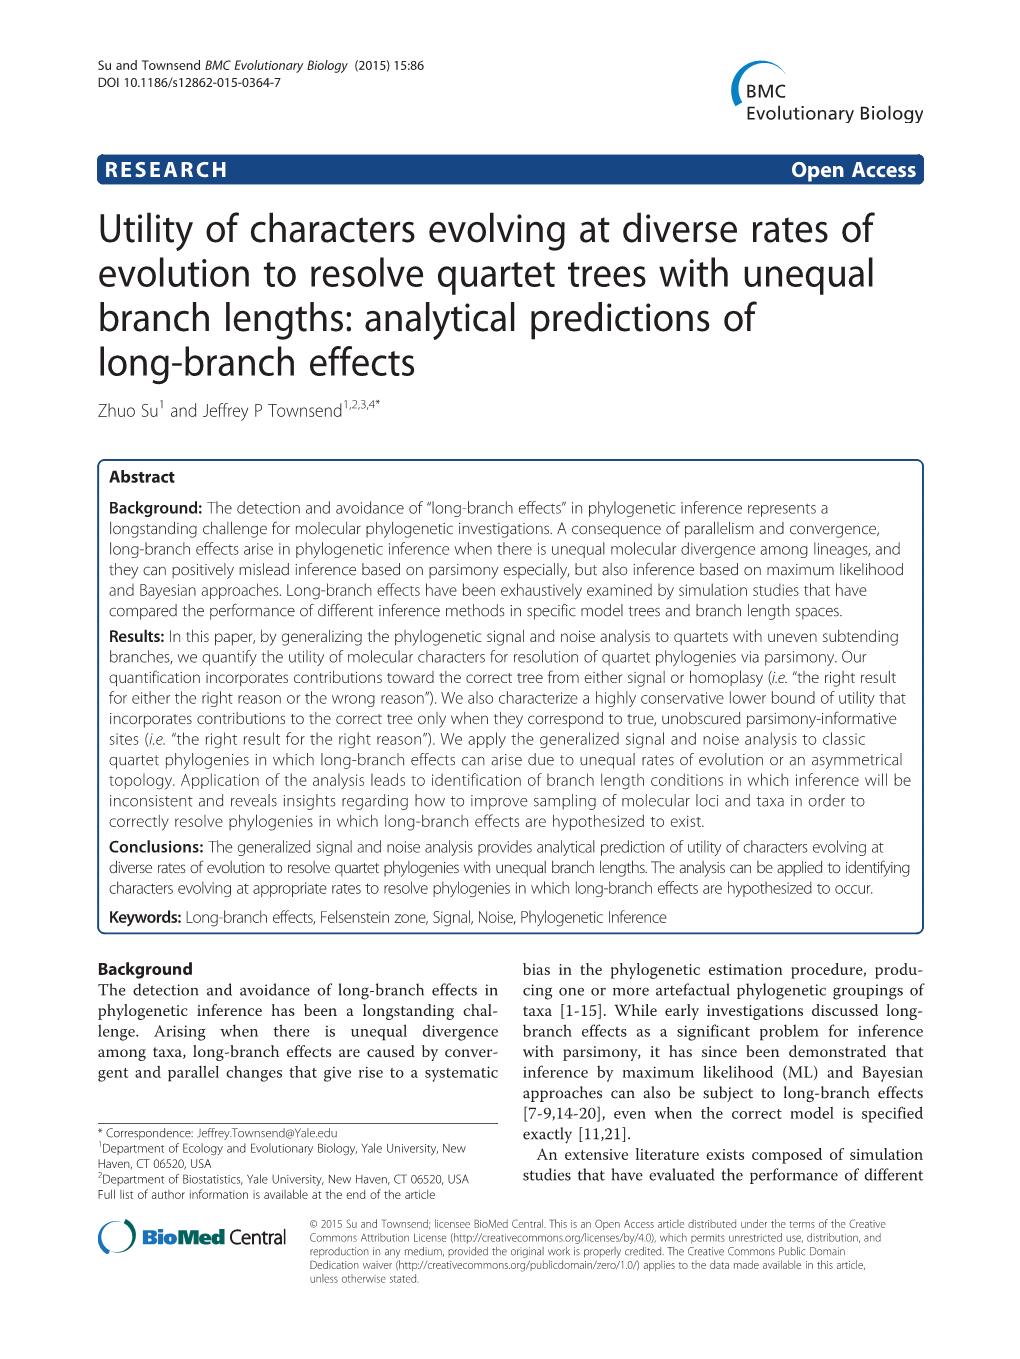 Utility of Characters Evolving at Diverse Rates of Evolution to Resolve Quartet